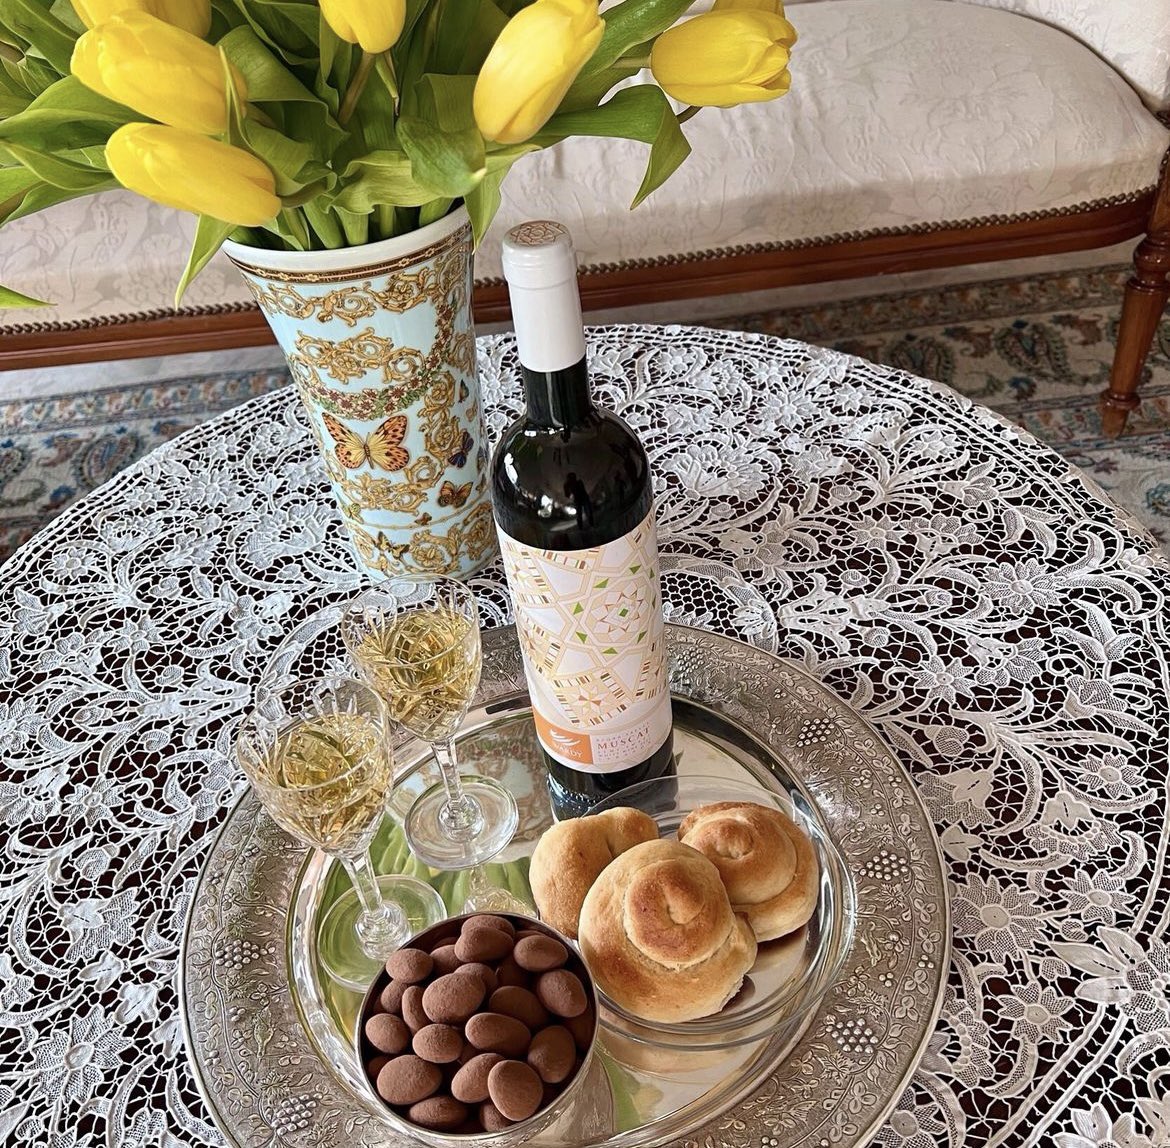 Instead of liqueur,this Easter Sunday we’ll be serving our delicious semi-sweet Muscat. Happy Easter #wine #semisweet #mediumsweet #muscat #vegan #sustainable #awardwinning #premiumwine #lebanesewine #lebanesewineries #eastersunday #happyeaster #spring #lebanon #familybusiness